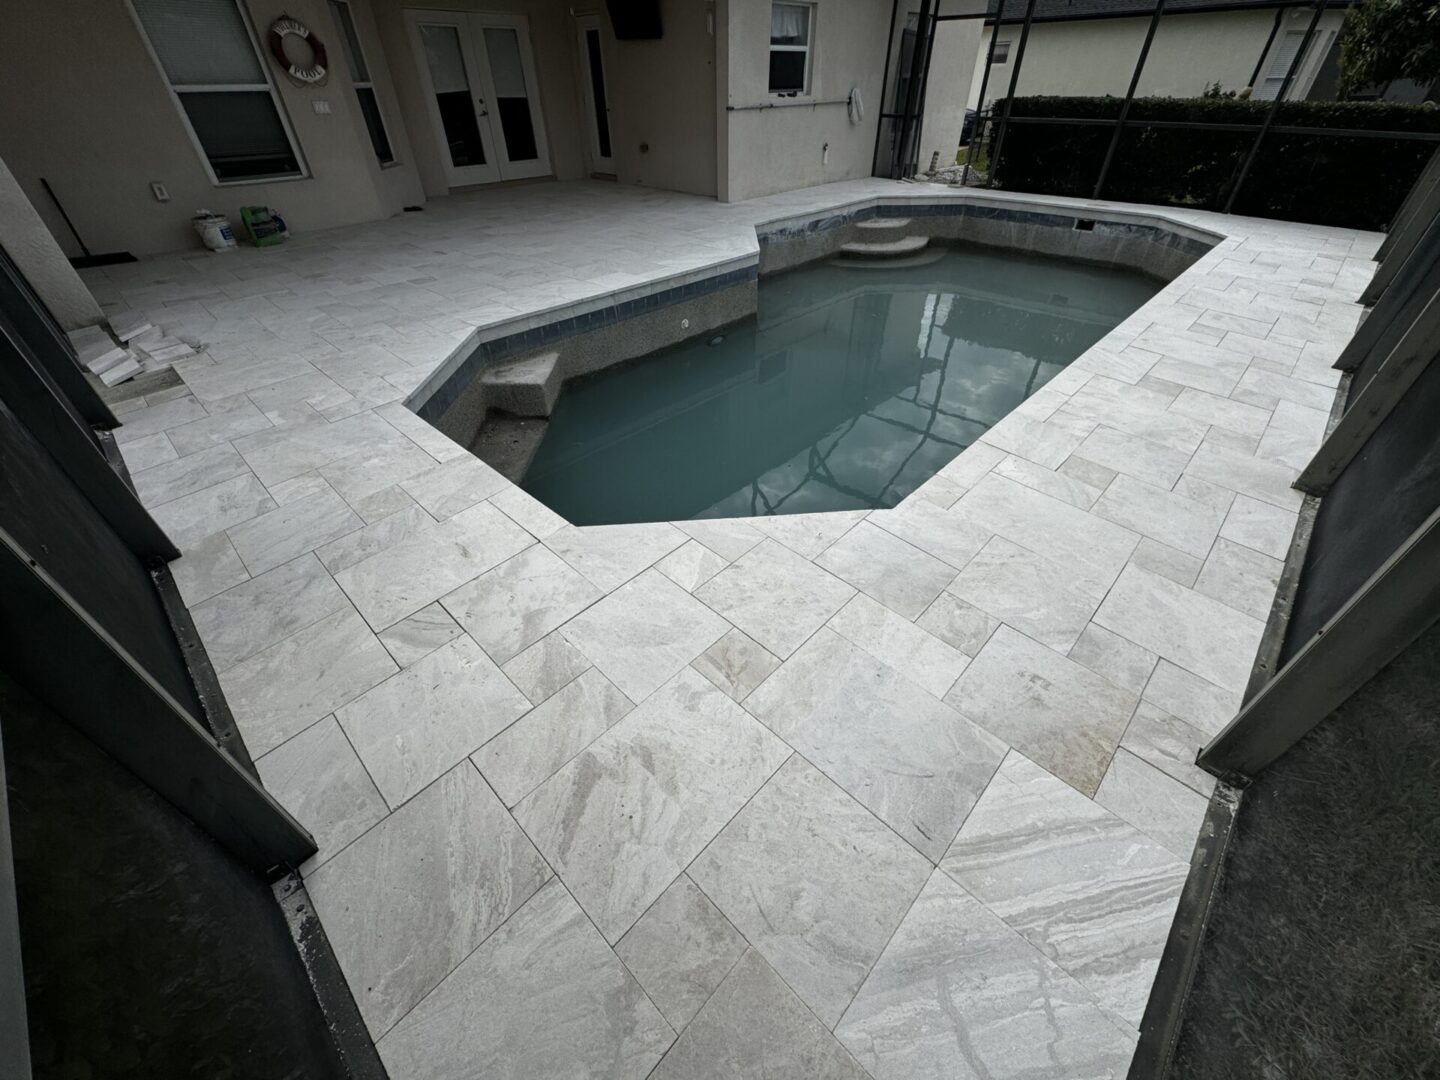 A backyard with a partially filled, small, rectangular pool surrounded by new grey tile flooring. The area is enclosed by a screen.